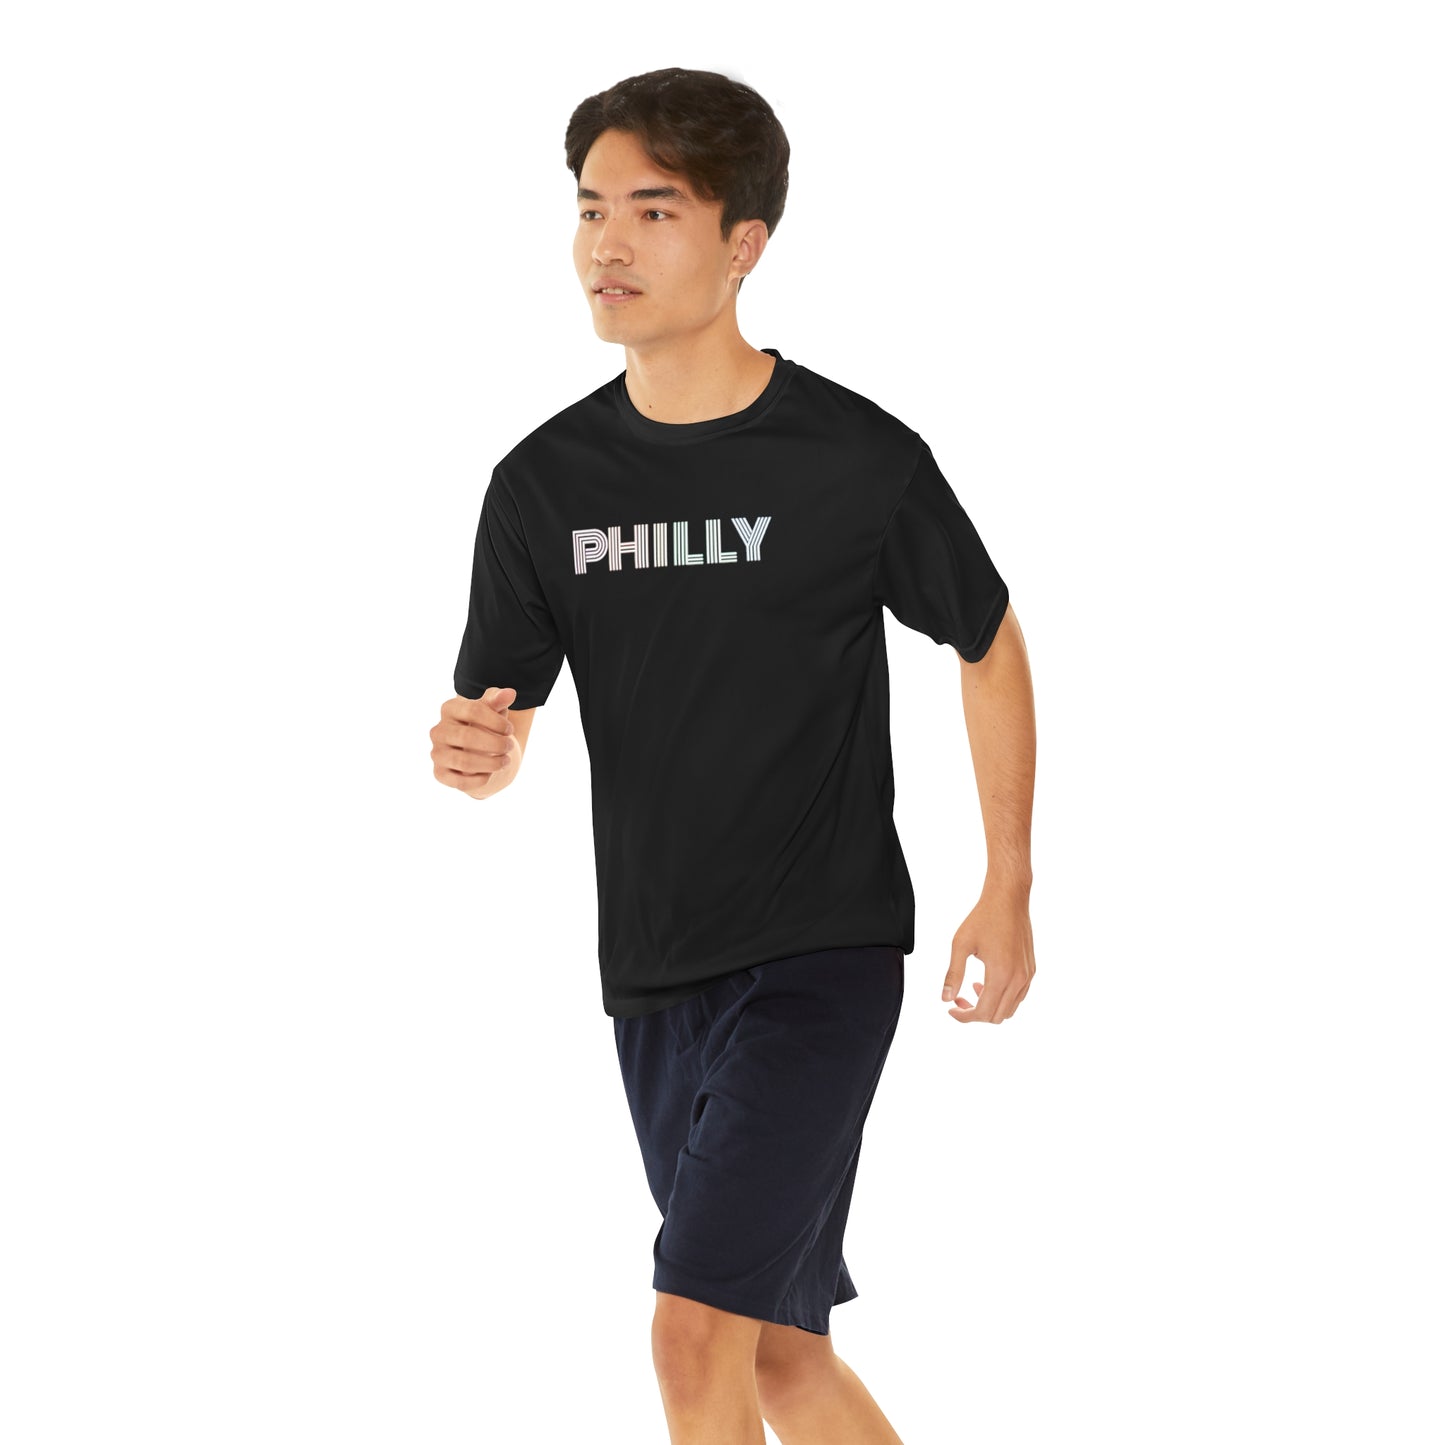 PHILLY Men's Performance T-Shirt